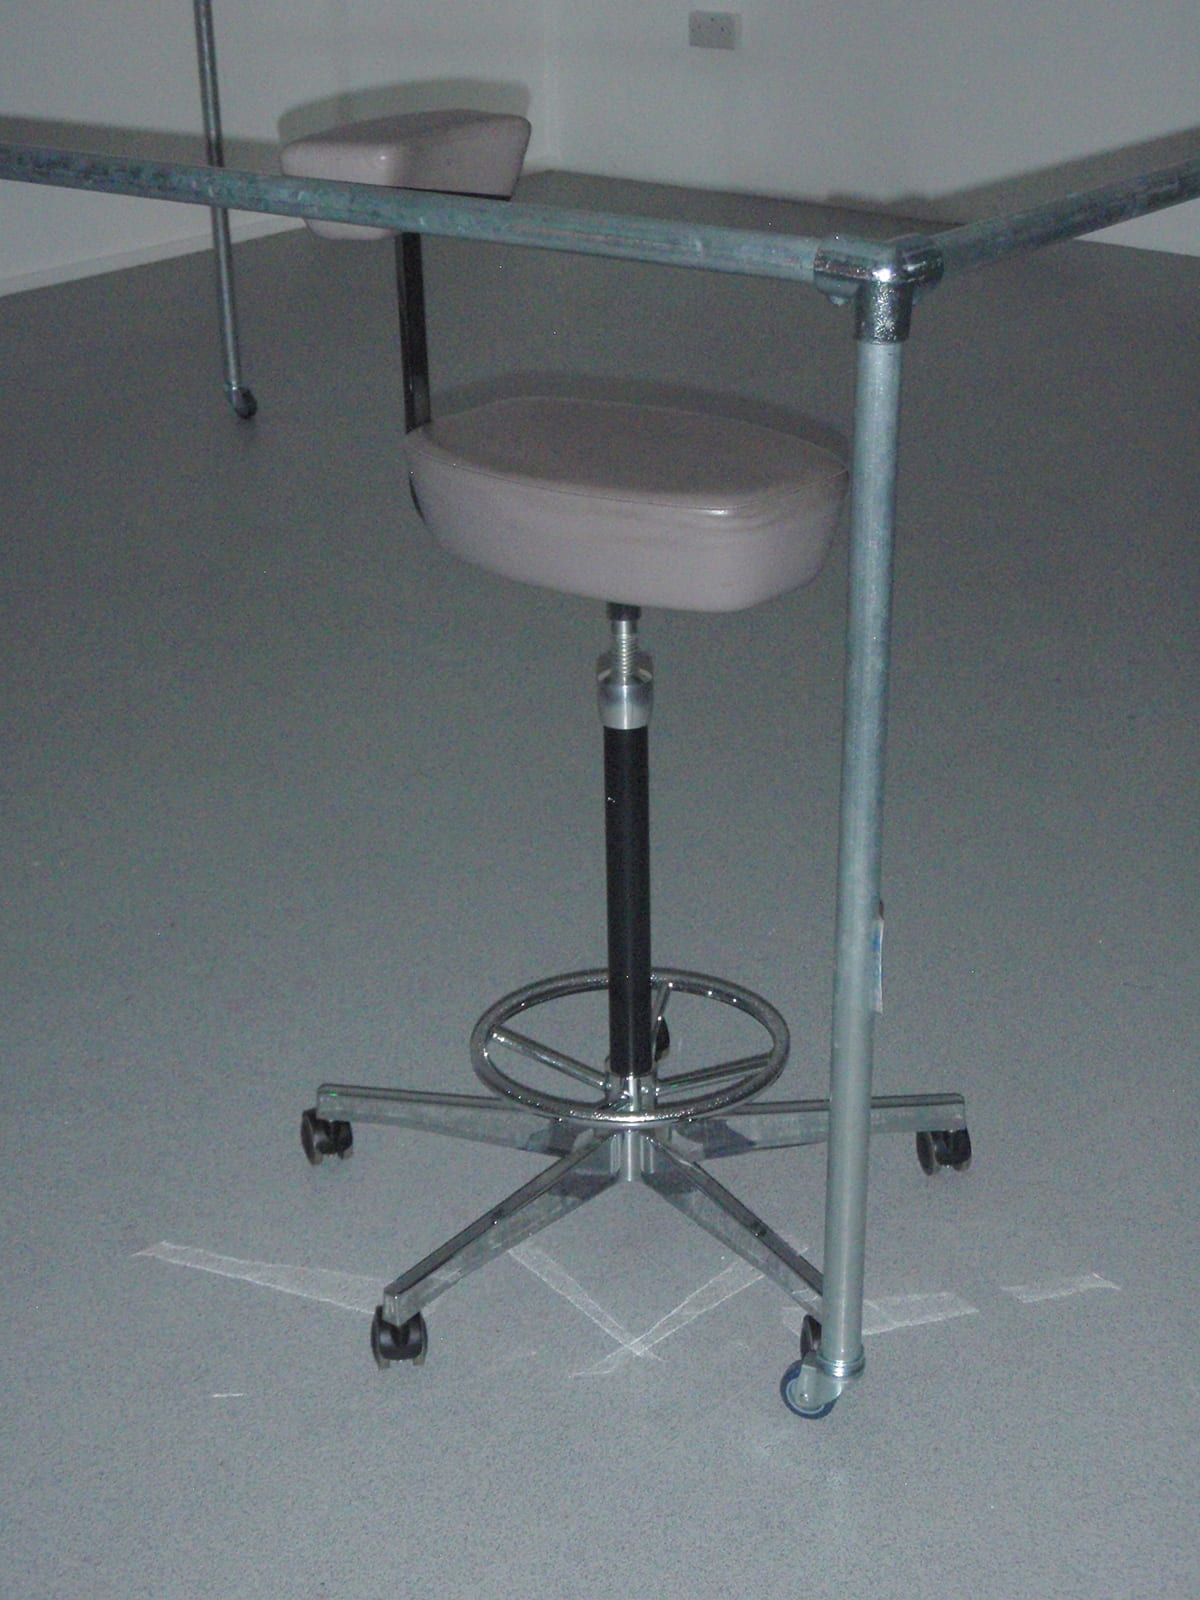 A flash photograph of a designer stool touching the edge of a metal frame